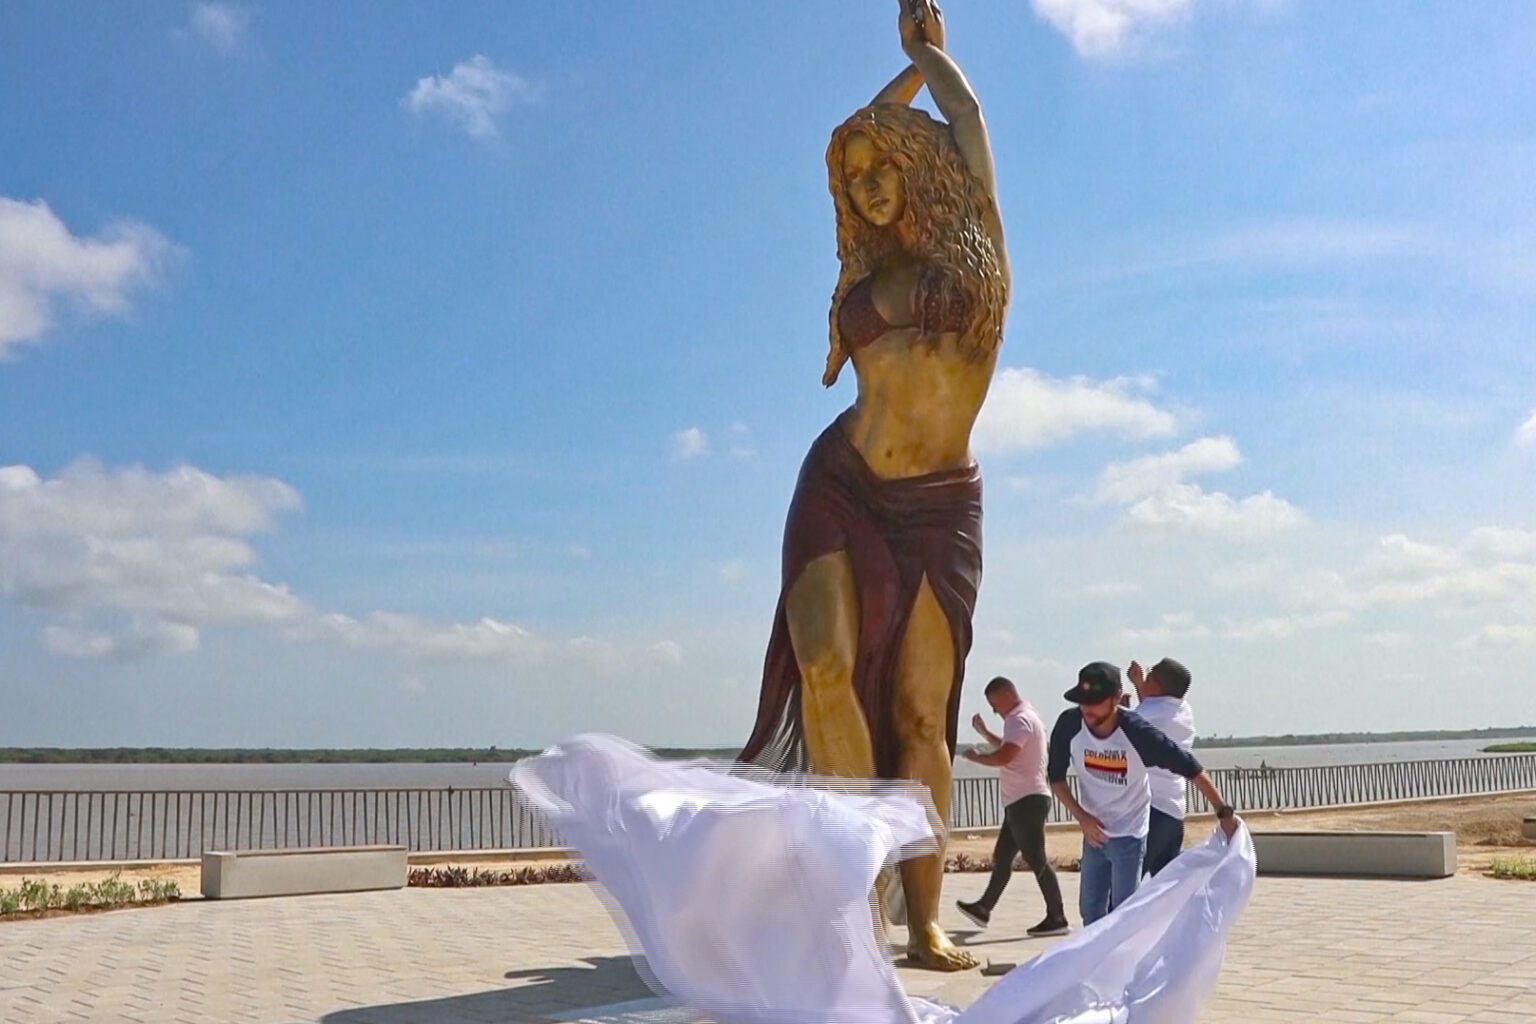 Hips don't lie they're memorialized in Shakira statue Key Biscayne